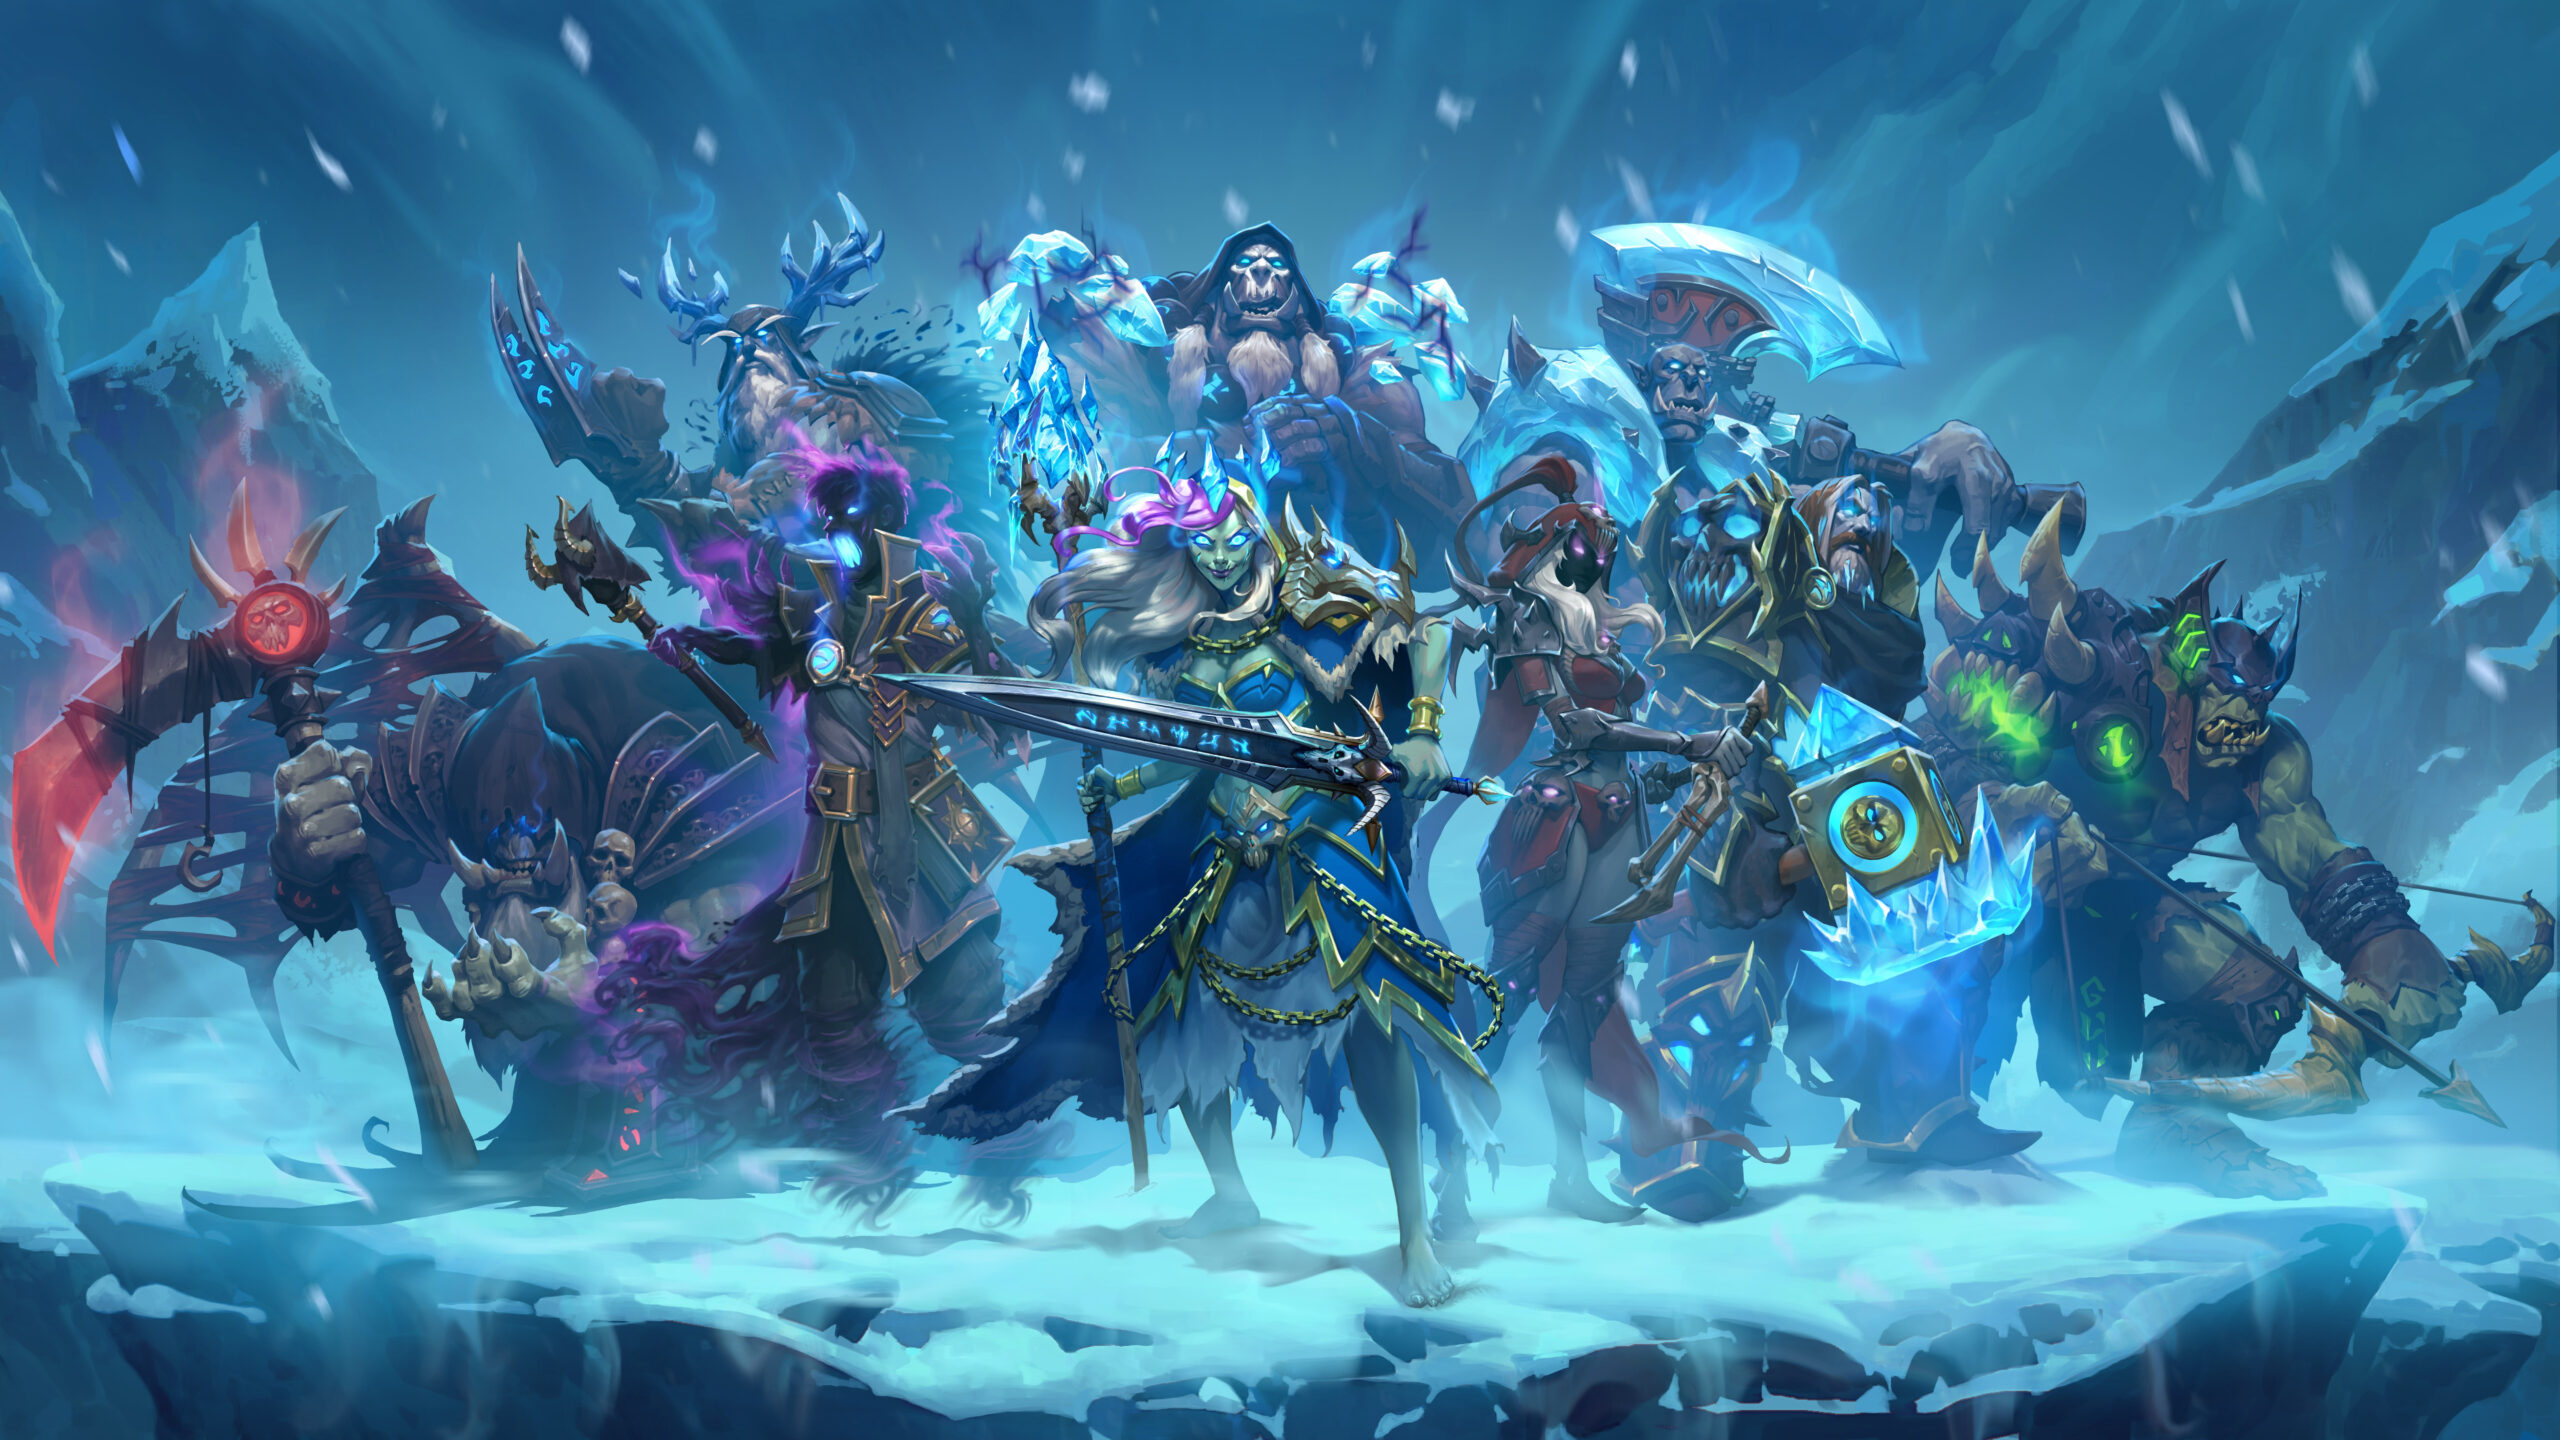 Wallpaper Soldier Animated Illustration Hearthstone, Hearthstone Wallpaper, Game